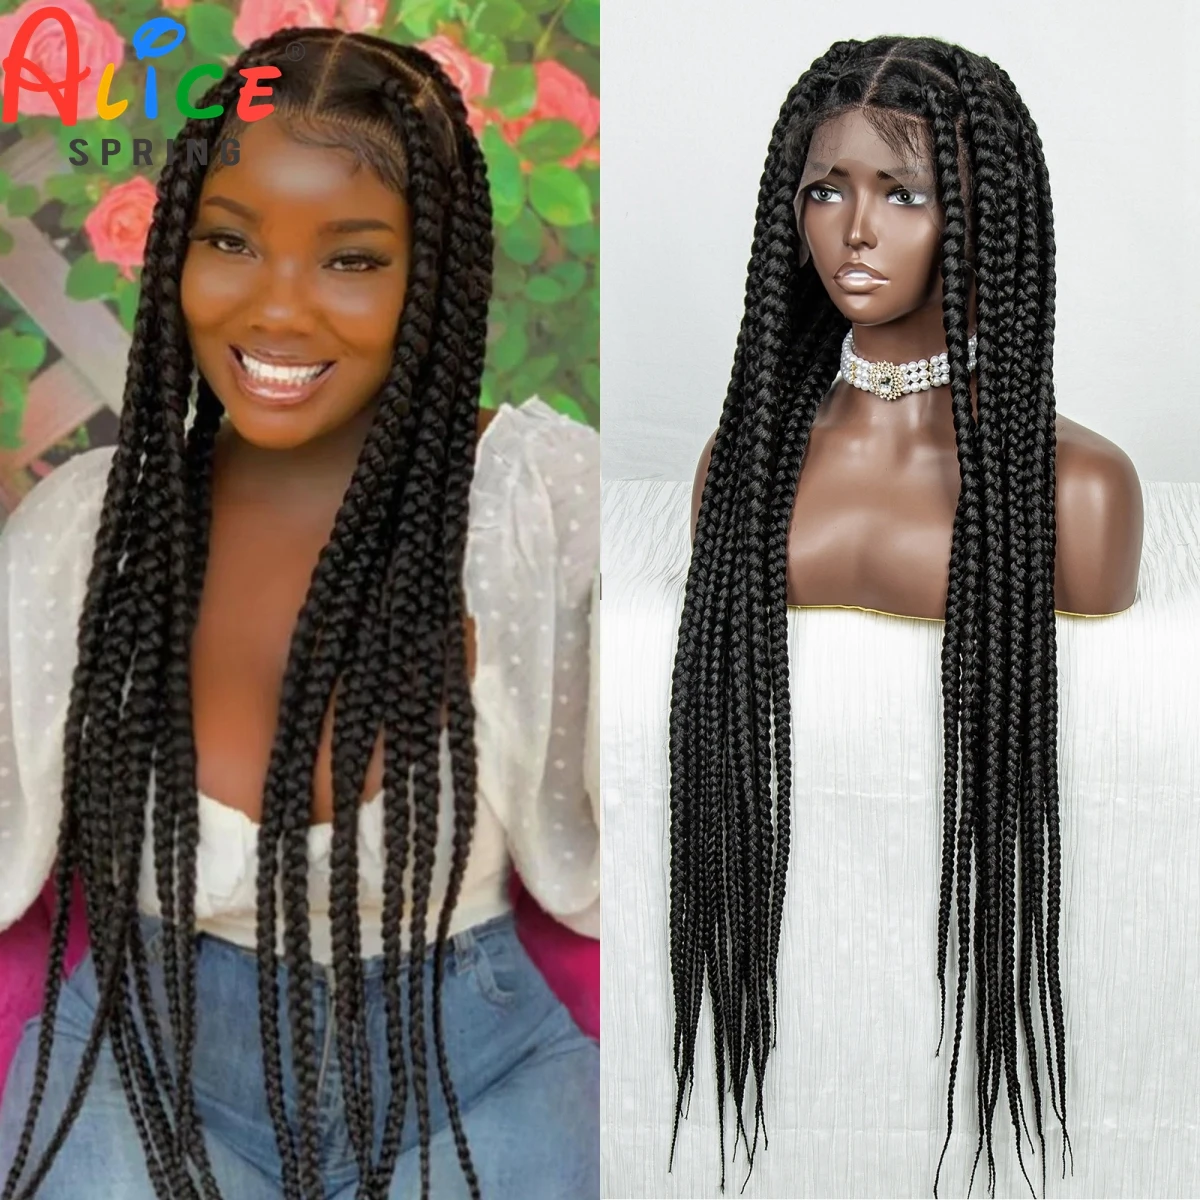 

36 Inches Long Braided Wigs Synthetic Lace Front Wig Knotless Box Braids Full Lace Wig for Black Women Twist Cornrow Braid Wig